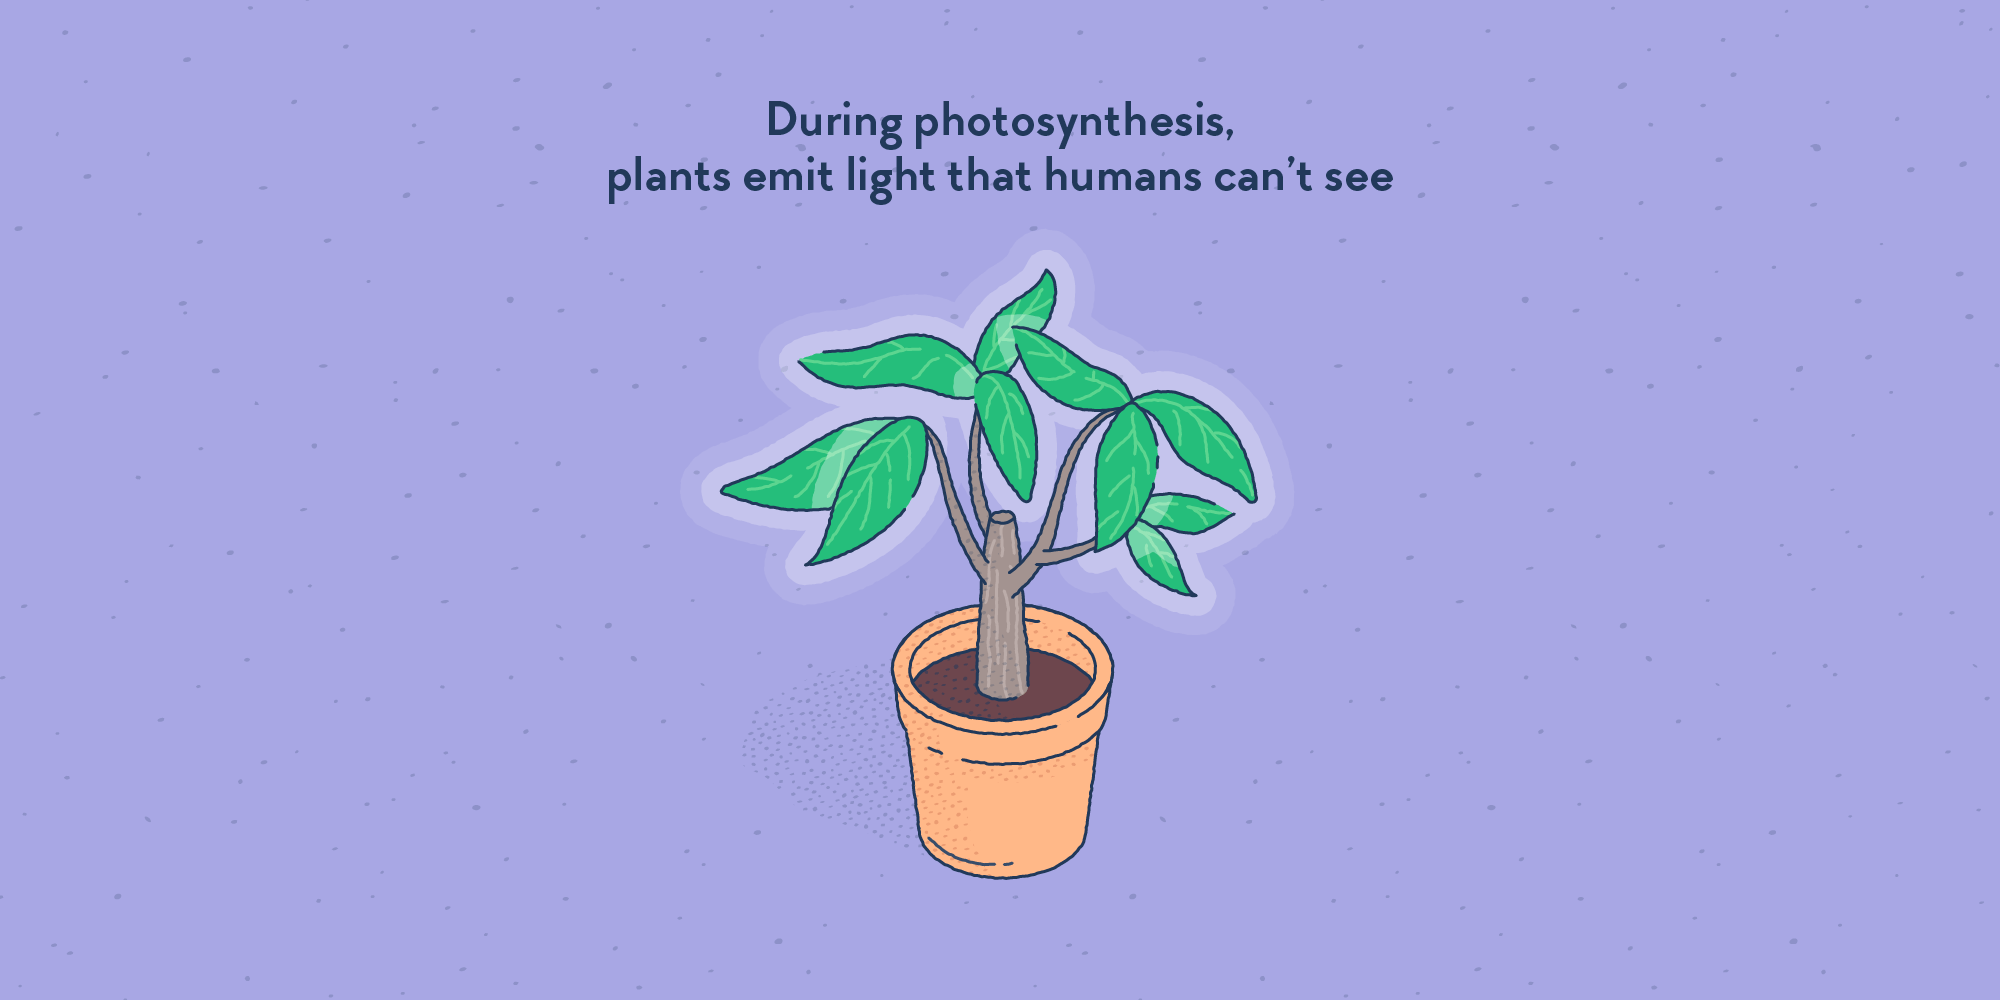 A plant in a pot, emitting light, with a white allow around its leaves.